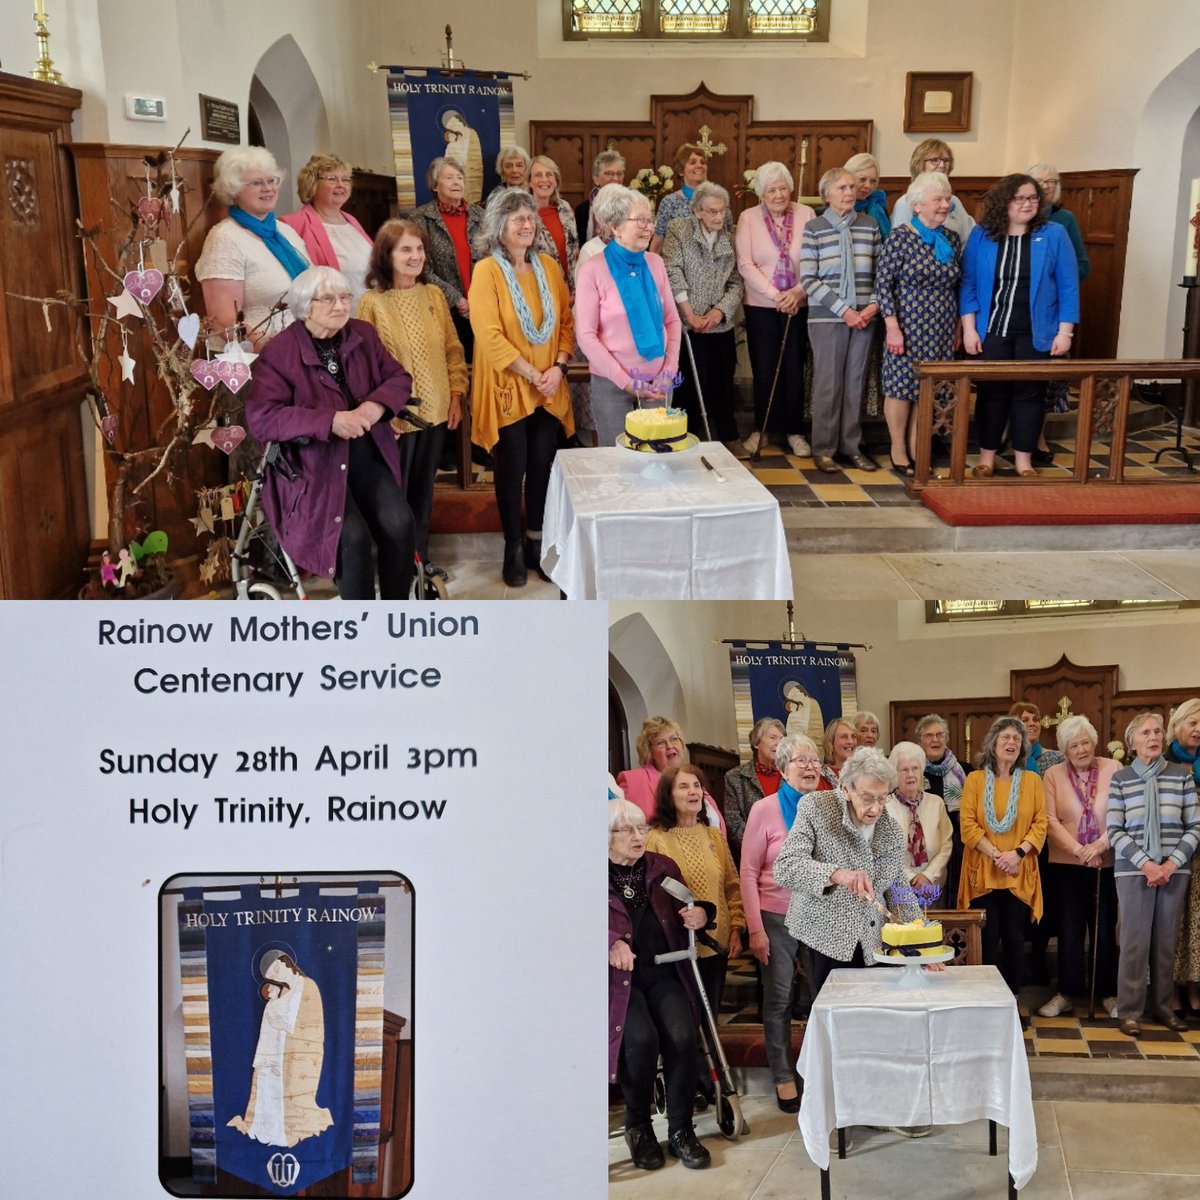 Congratulations to #Rainow @MothersUnion on their 100th anniversary. I was grateful to attend Sunday's Centenary Service and celebrate their contribution to the local community over so many years.